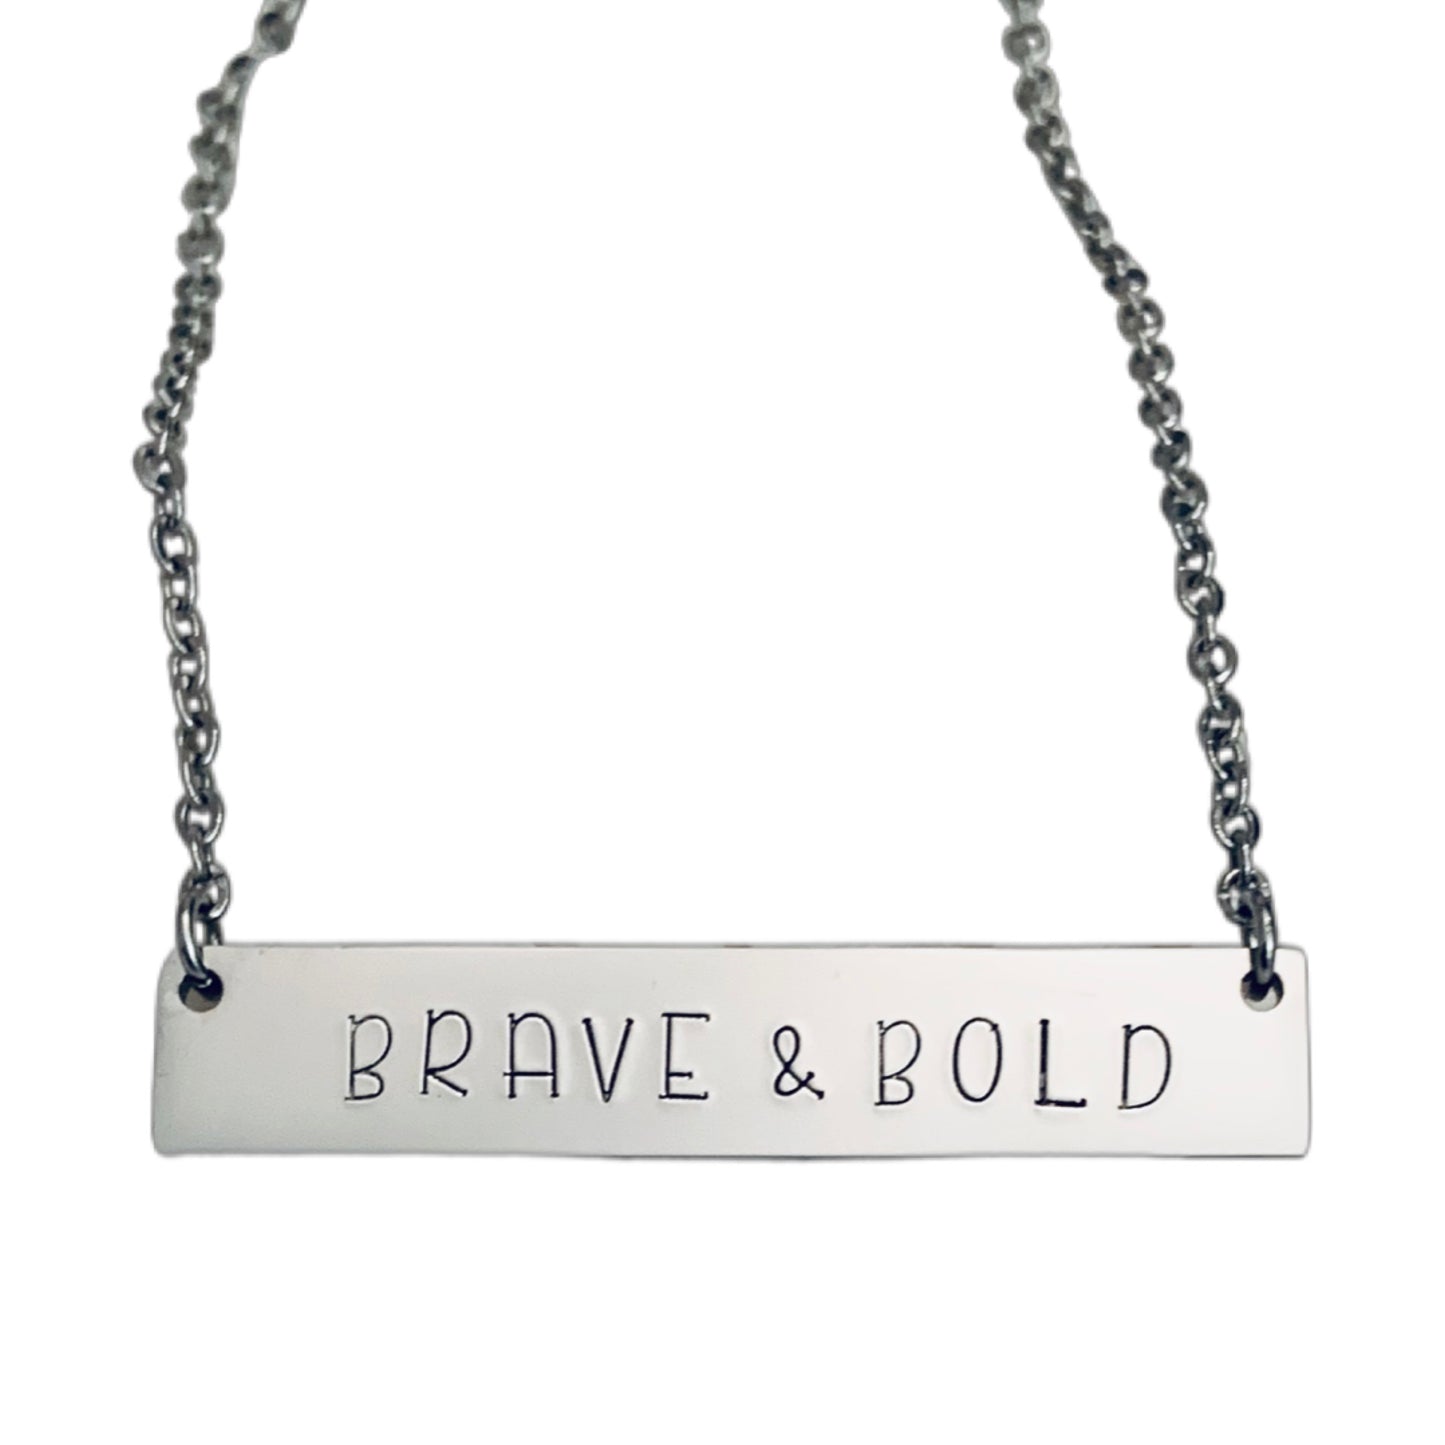 Brave & Bold (Colleen Hoover) - Bar Necklace